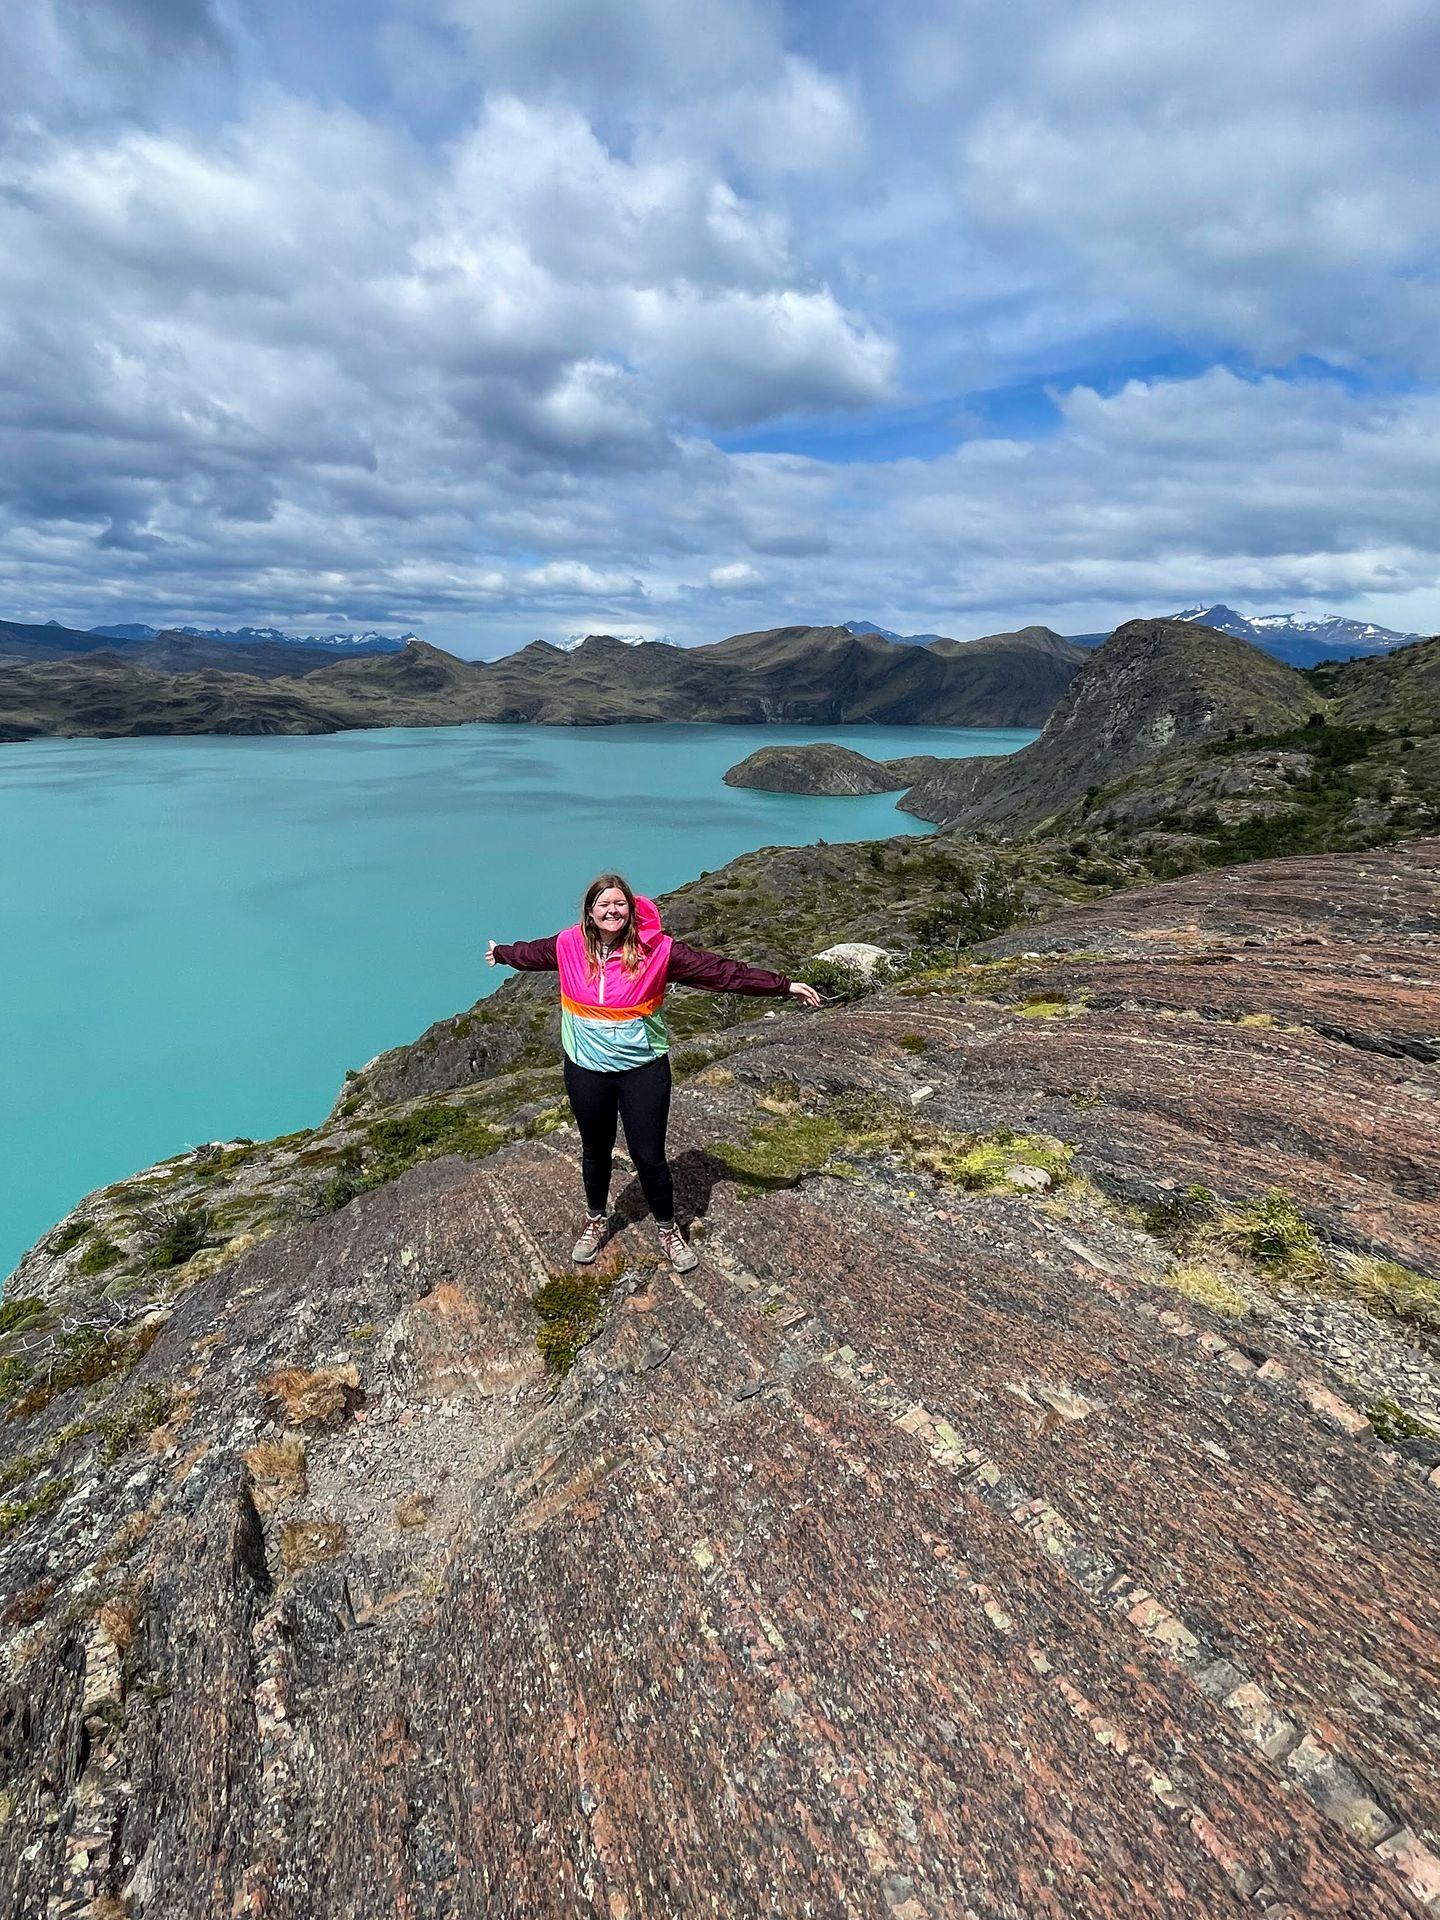 Lydia standing on a curved rockface with her arms in the air. In the background, there is a lake with a brilliant blue color.